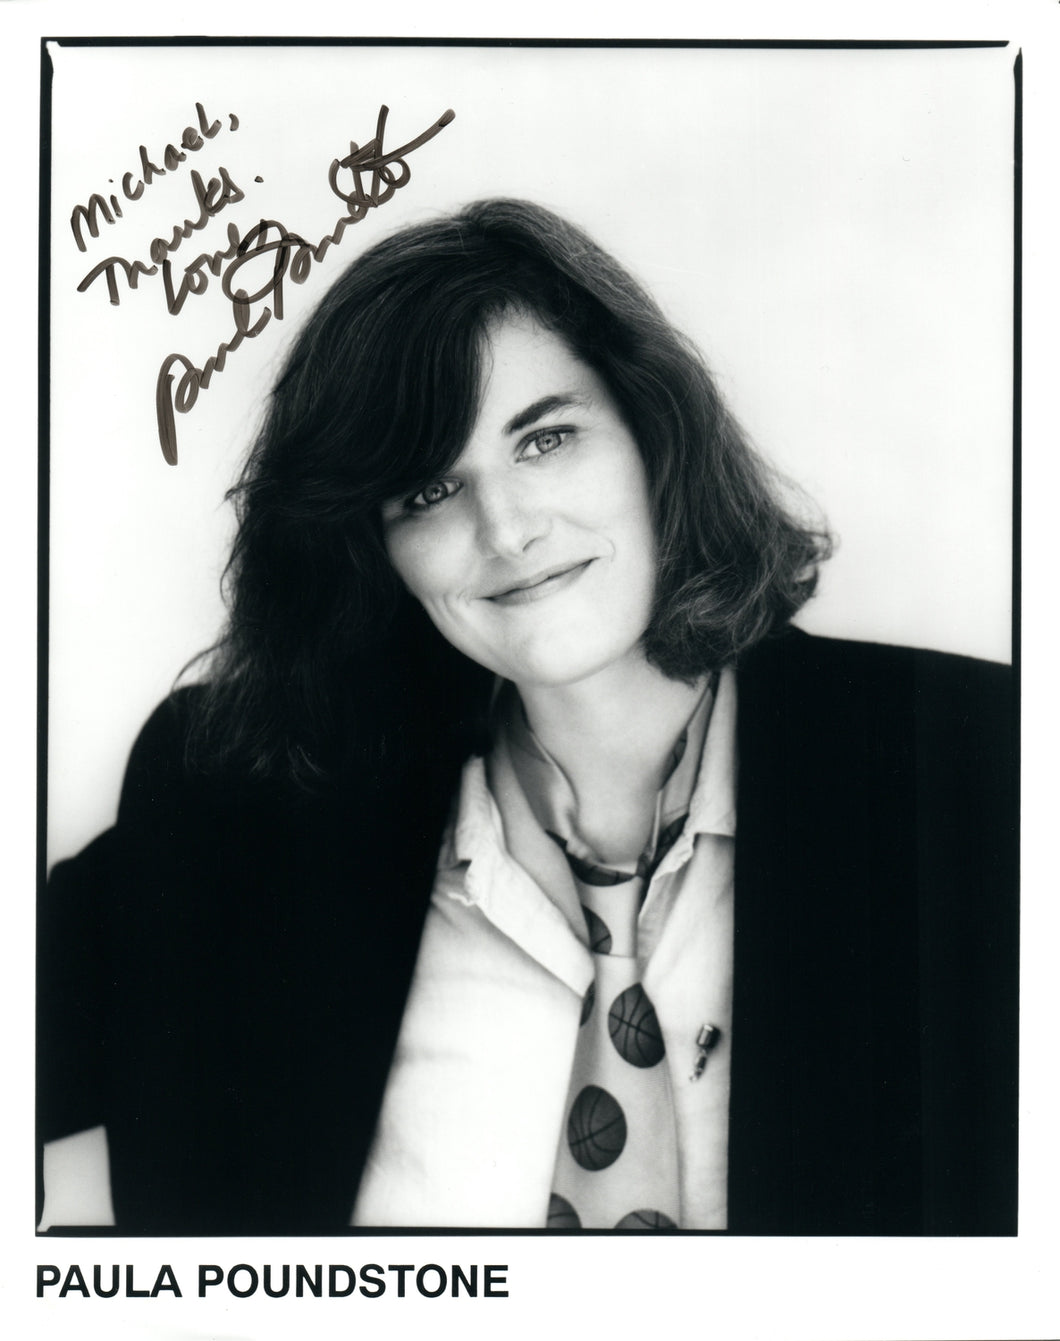 Paula Poundstone Autographed Signed 8x10 Photo Stand Up Comedy Comedian